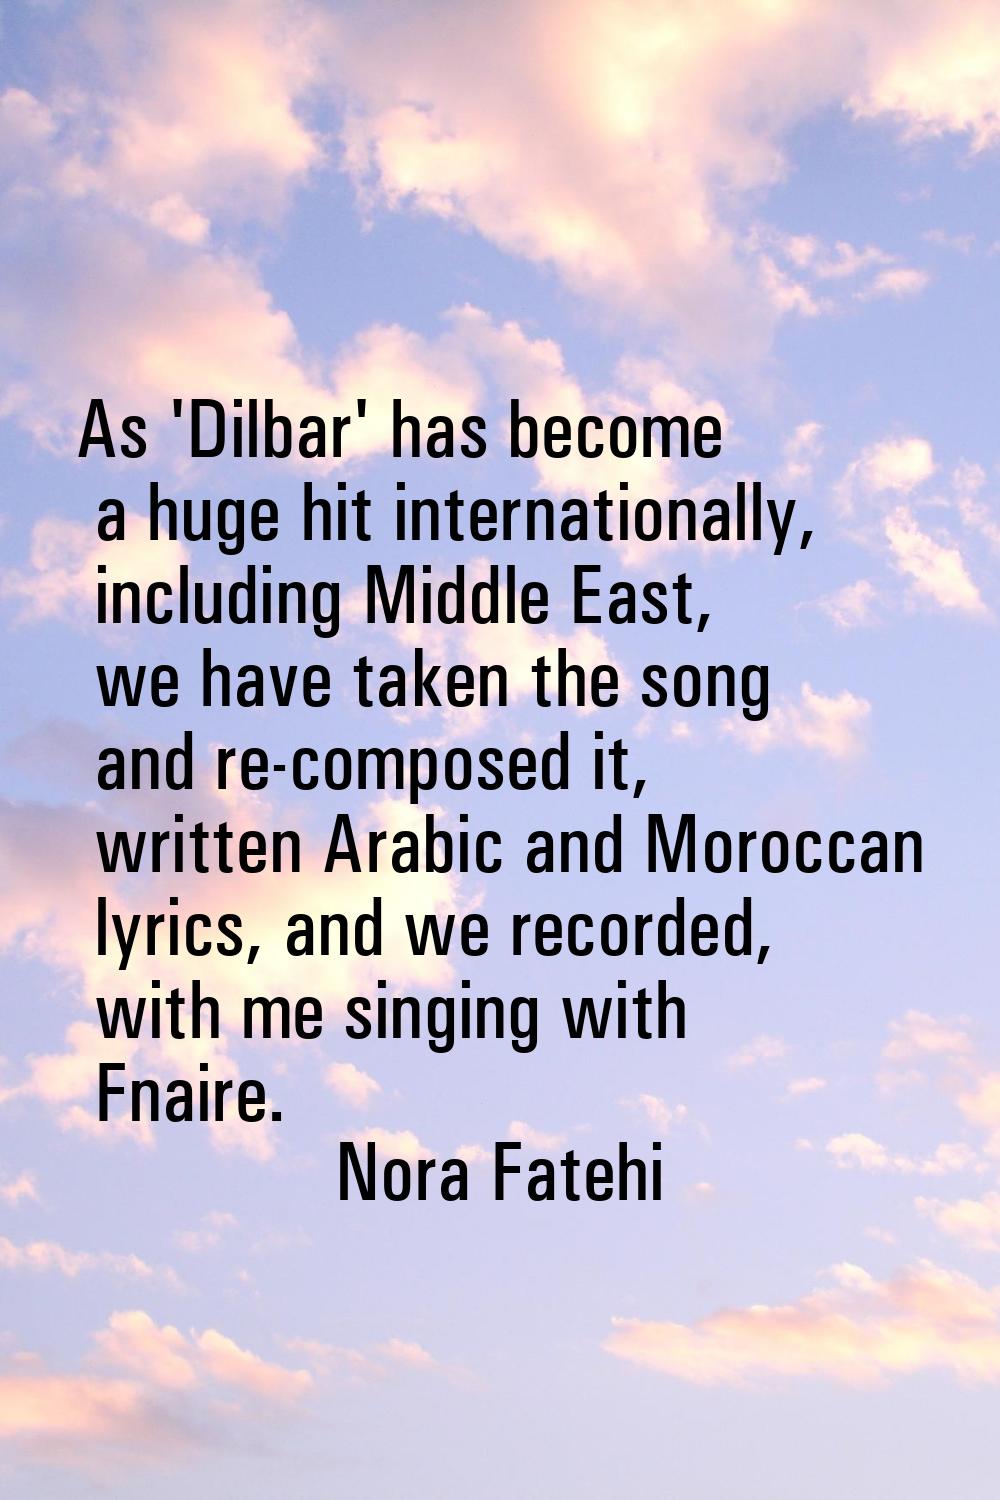 As 'Dilbar' has become a huge hit internationally, including Middle East, we have taken the song an